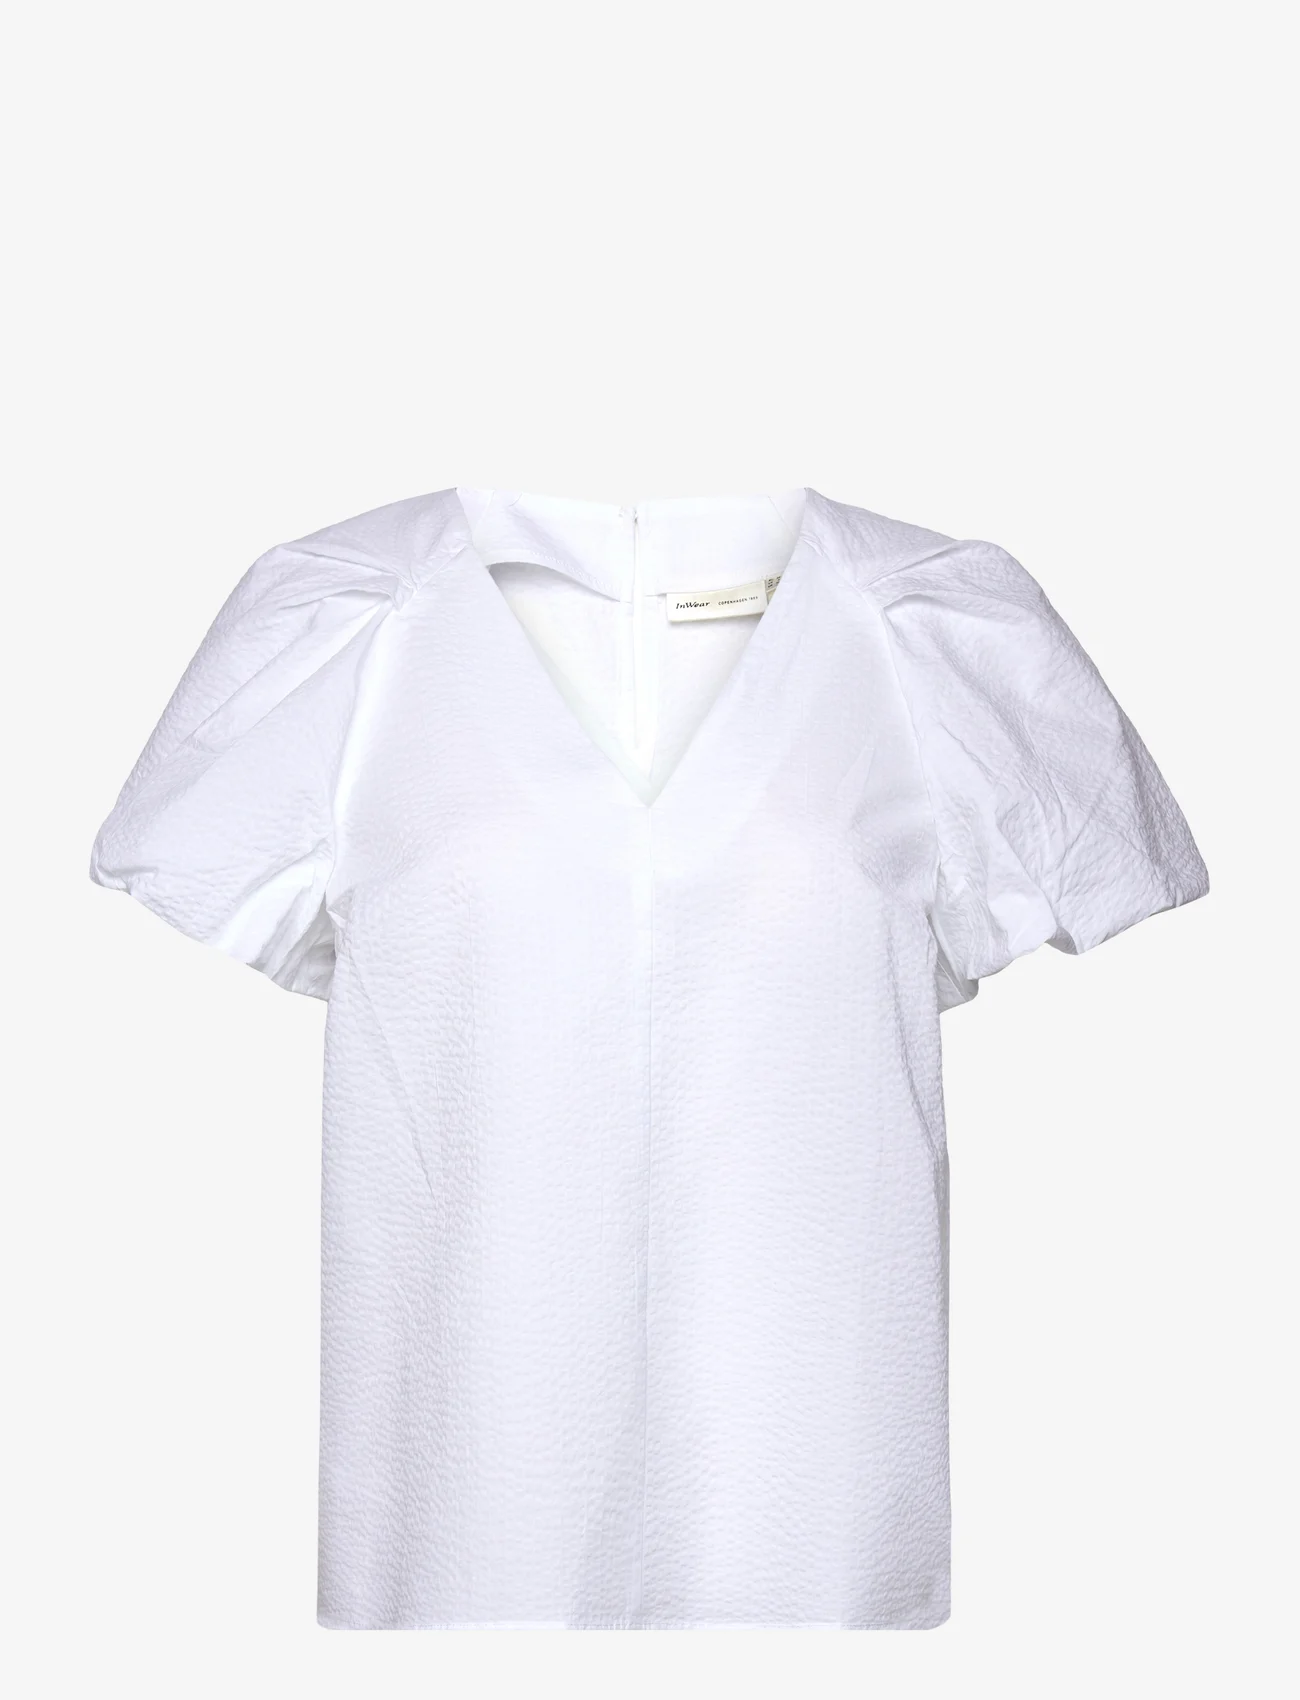 InWear - TaceyIW Top - short-sleeved blouses - pure white - 0